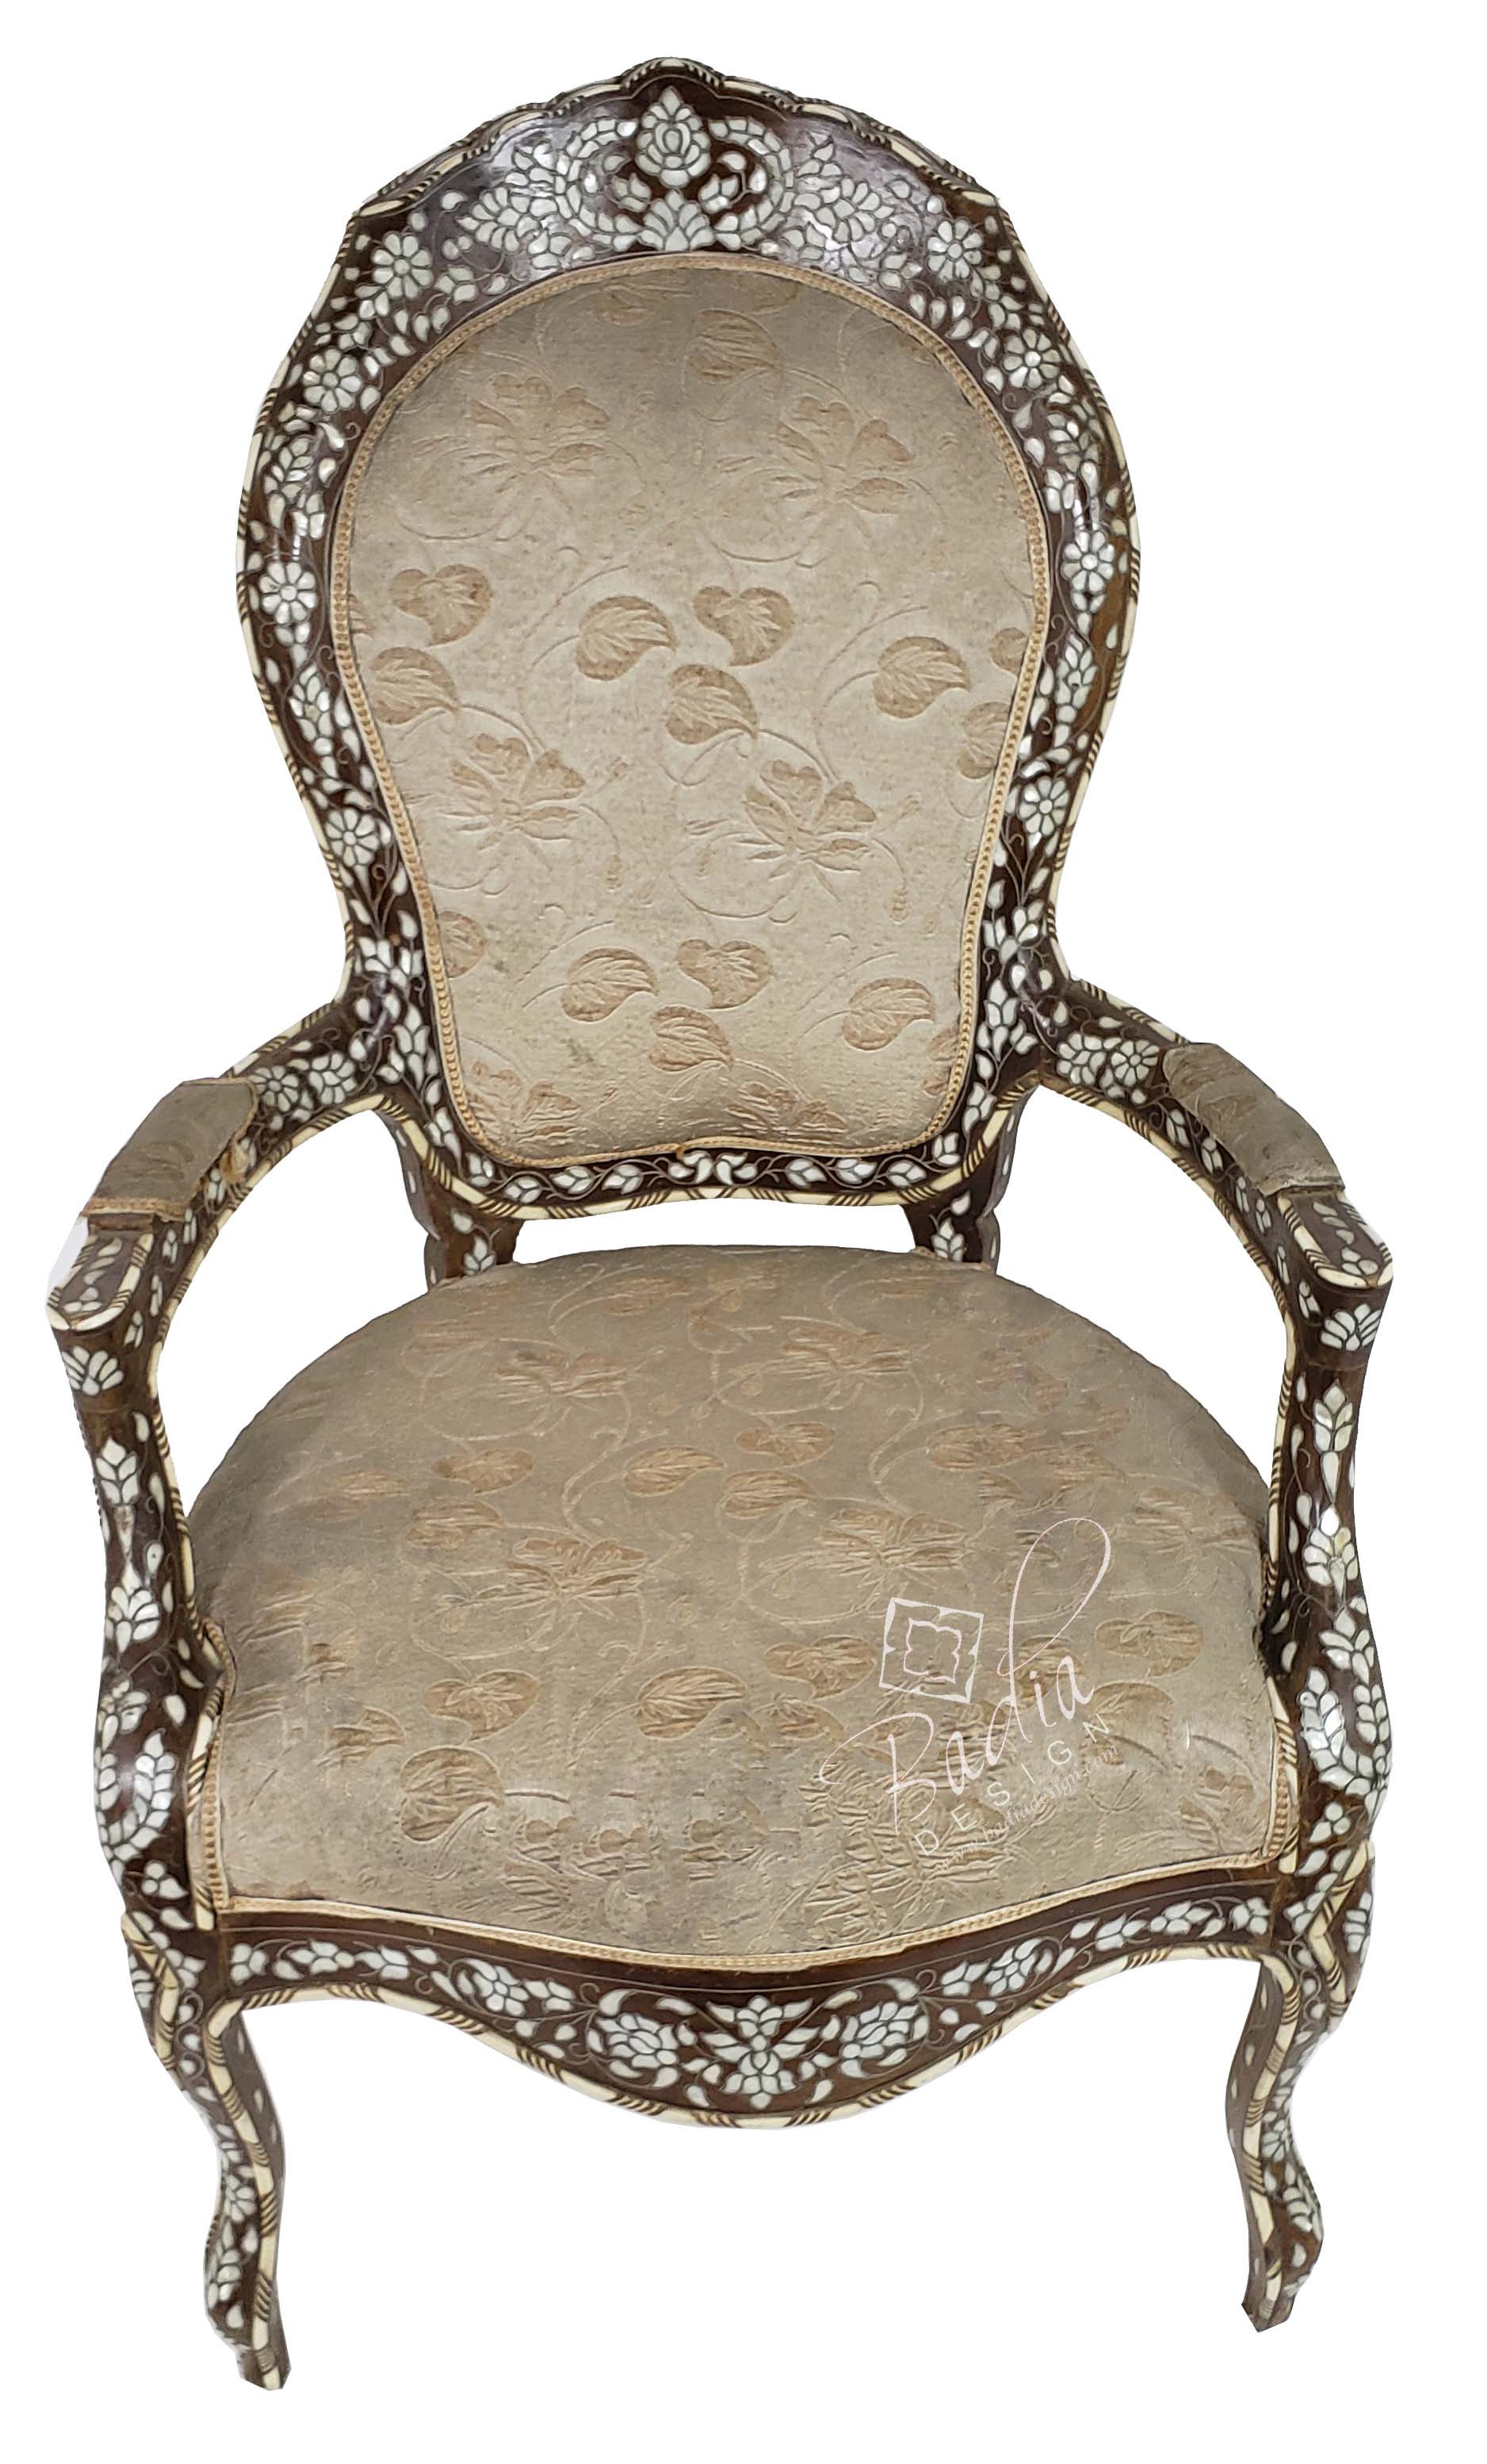 moroccan-mother-of-pearl-inlaid-chair-mop-ch028.jpg